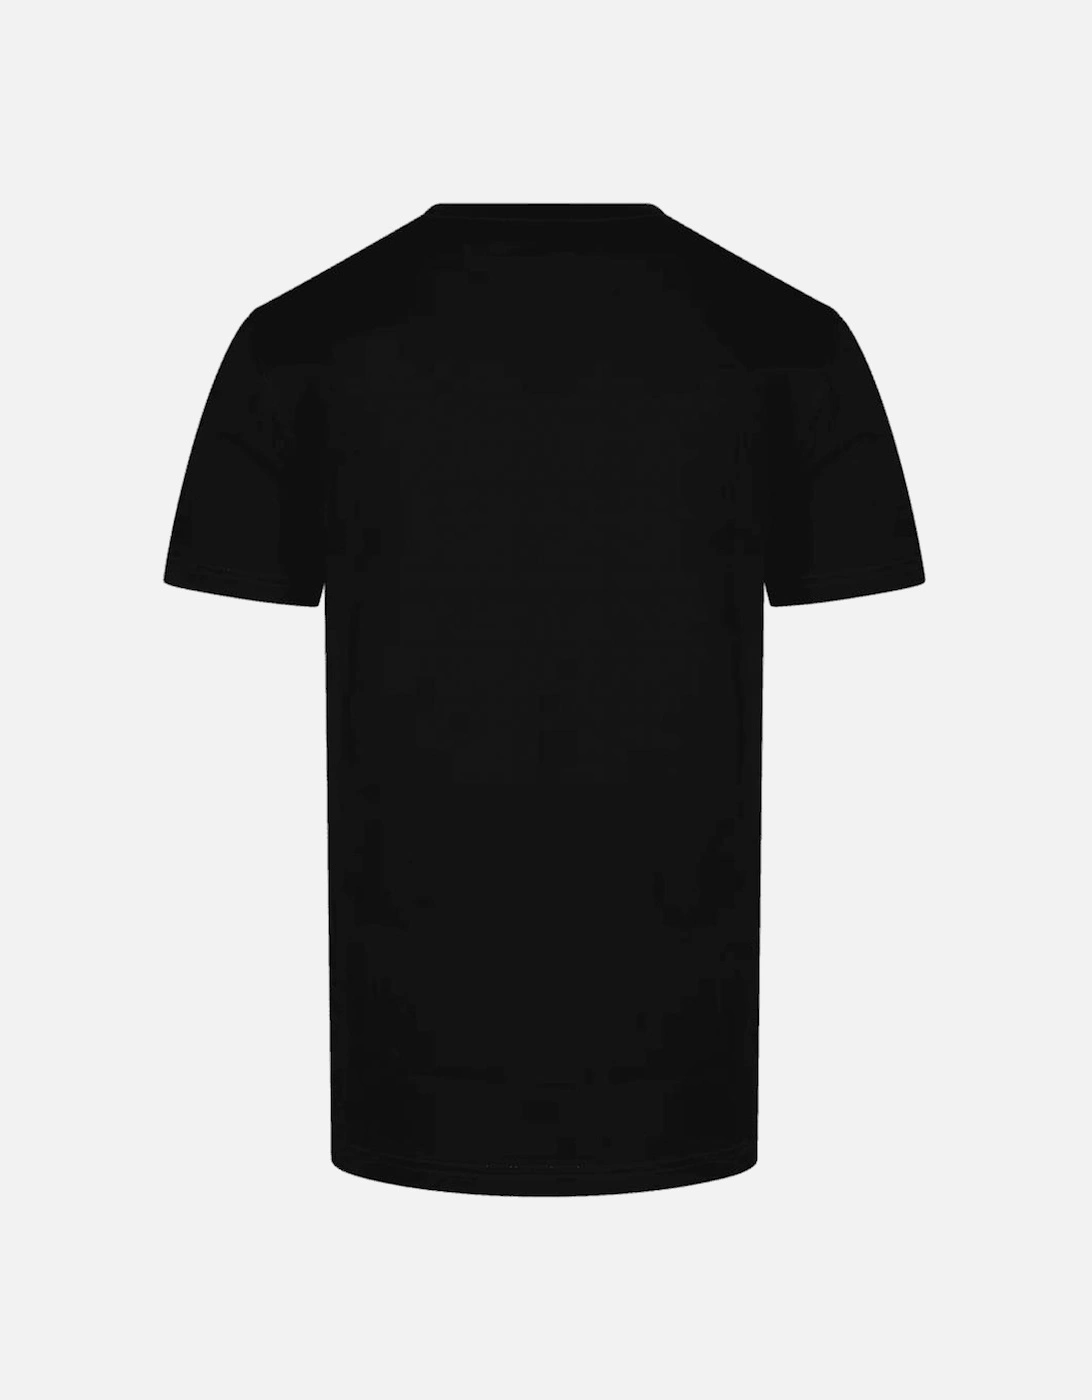 T-DIEGOR-K69 Embroidered Logo Graphic Cotton Black T-Shirt